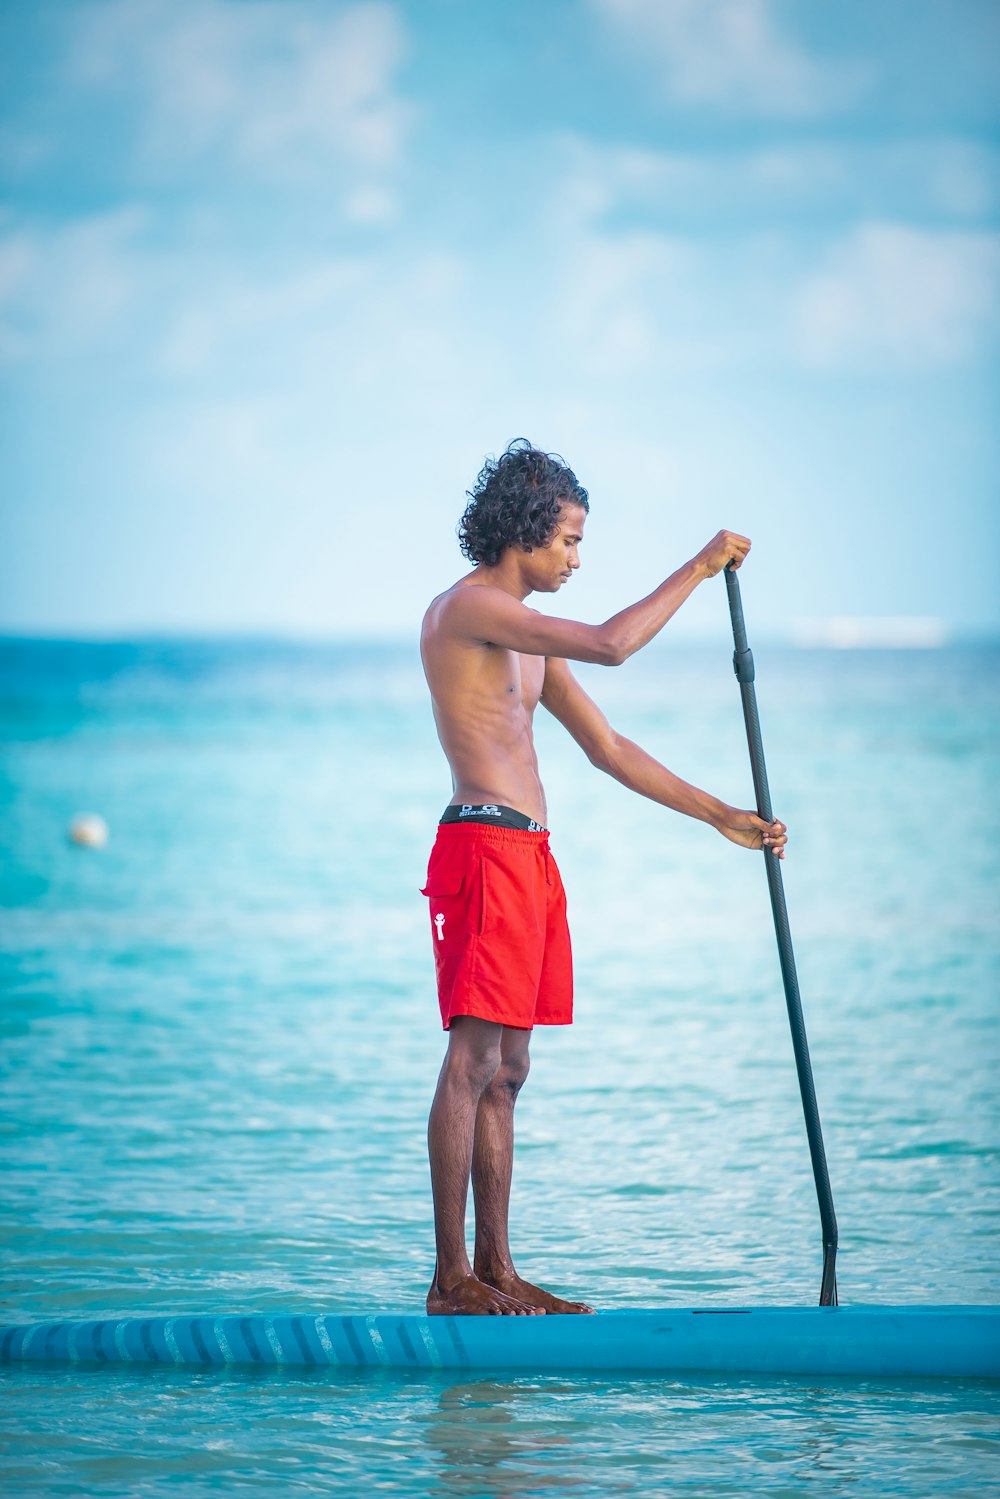 topless boy in red shorts holding black and white stick standing on body of water during